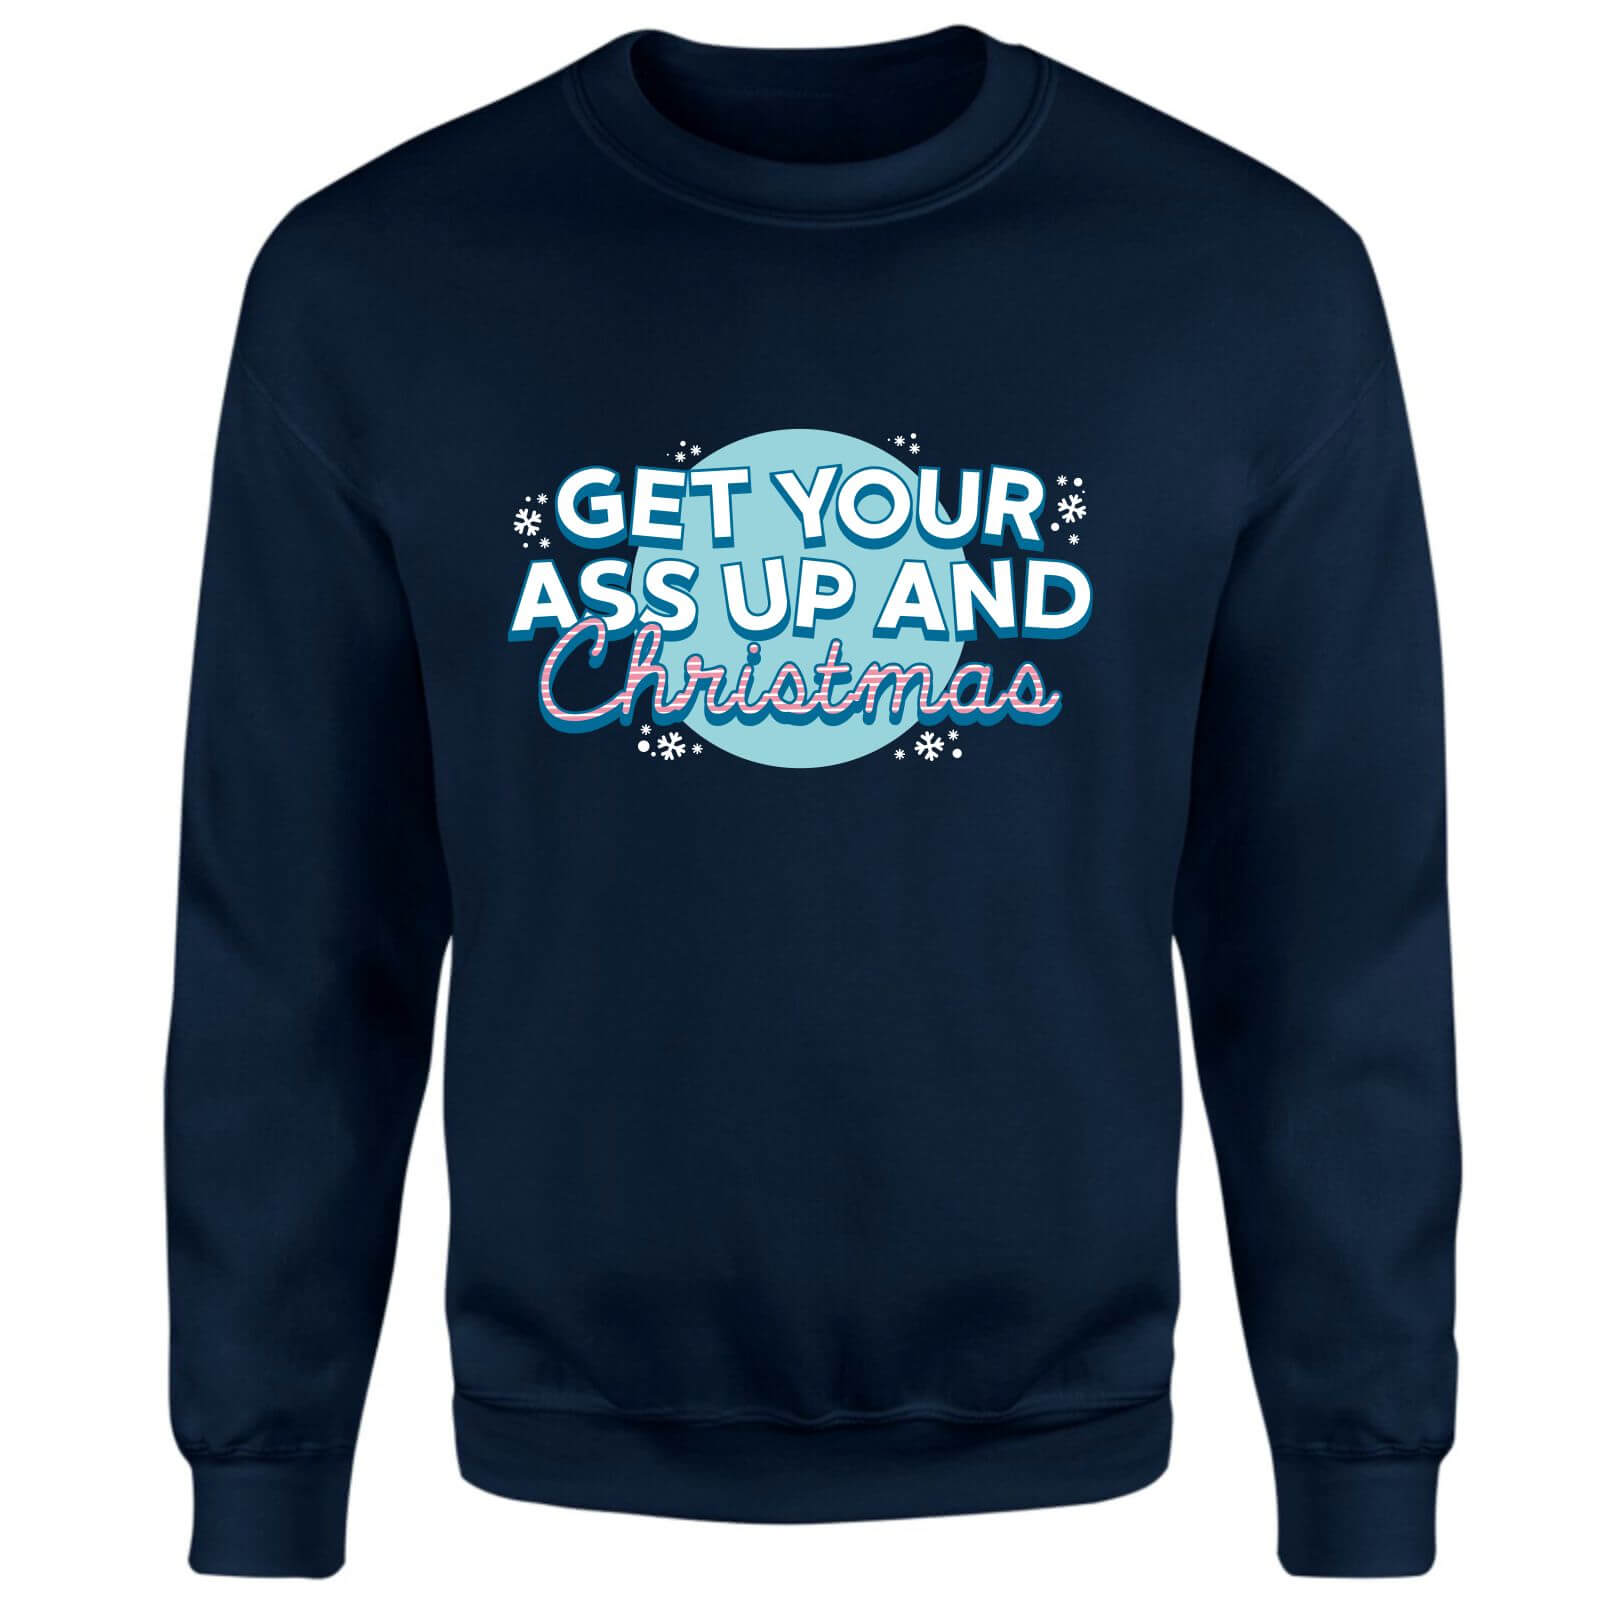 Get Your Ass Up And Christmas Sweatshirt - Navy - XS - Navy